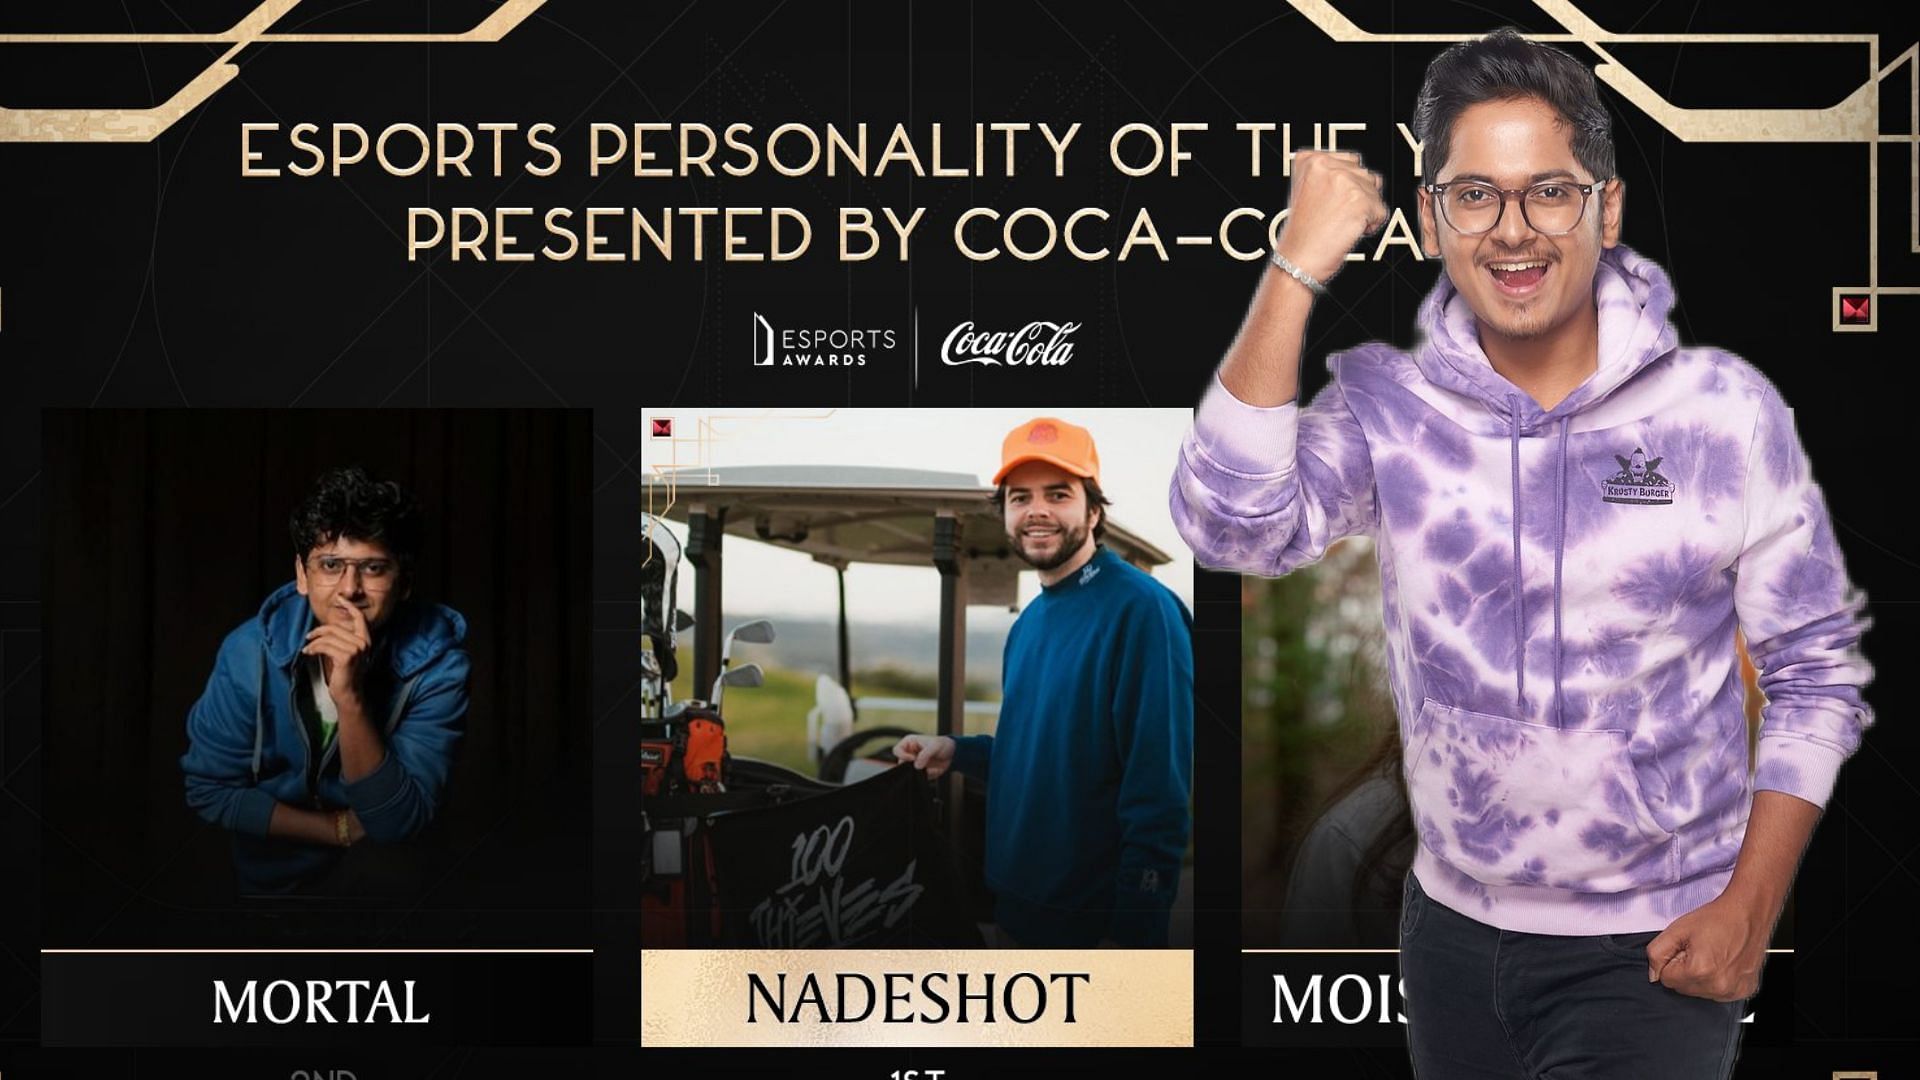 Mortal holds second place in Esports Personality of the Year award (Image via Sportskeeda)